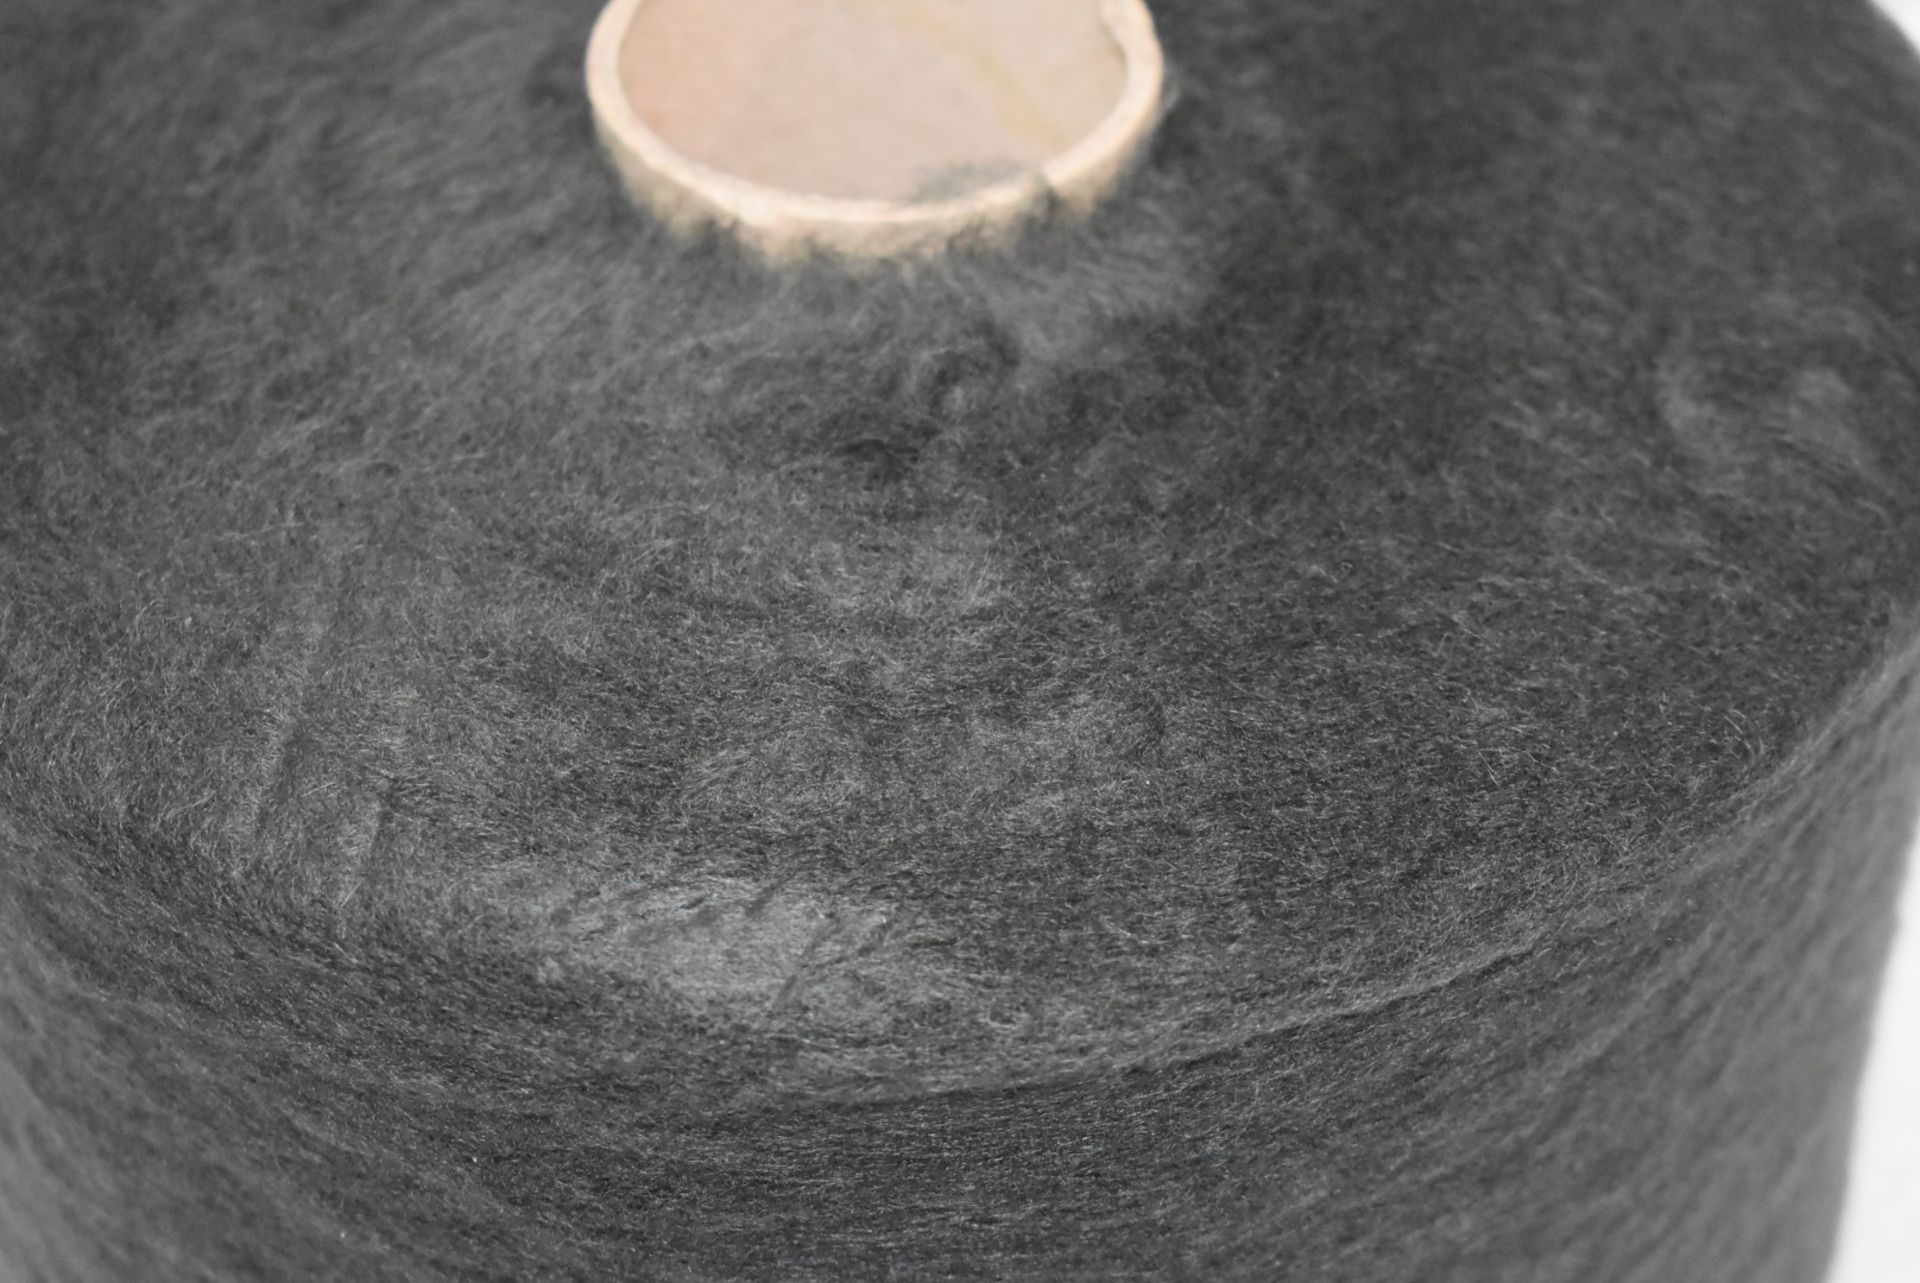 12 x Cones of 1/7,5 Lagona Knitting Yarn - Charcoal - Approx Weight: 2,300g - New Stock ABL Yarn - Image 6 of 9